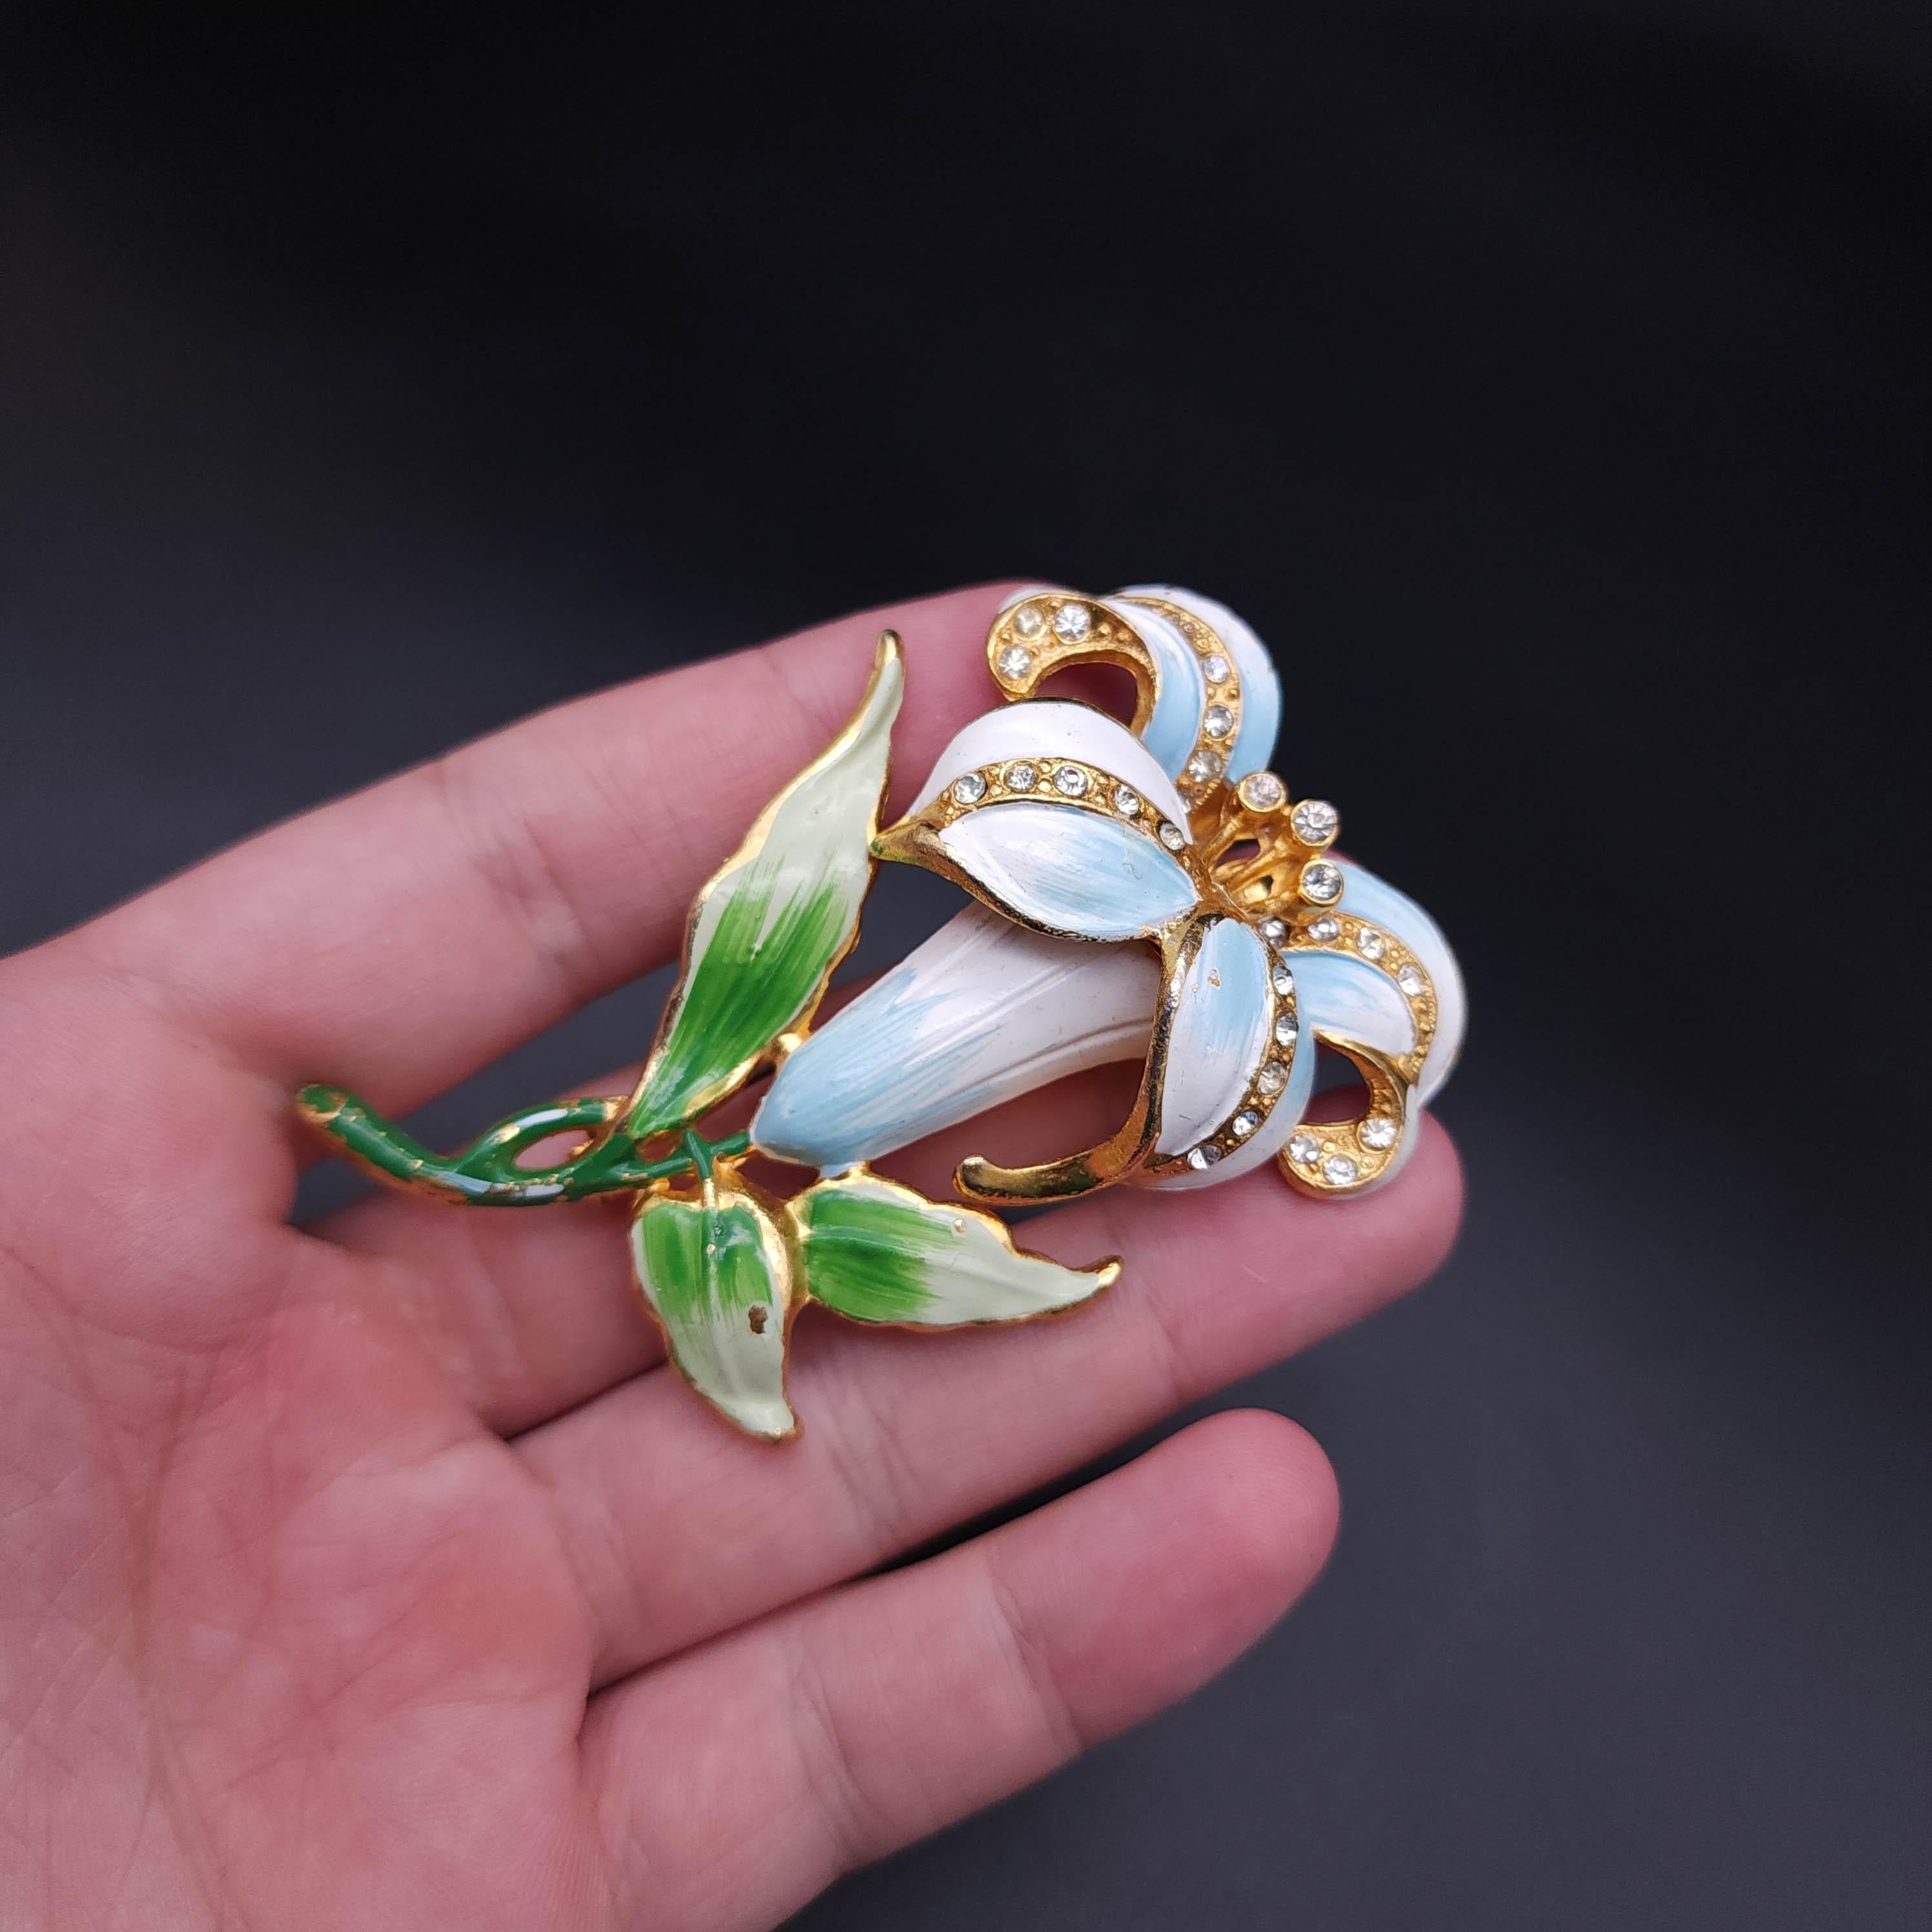 Women's or Men's Vintage Coro Flower Pin Brooch, Green White Blue Enamel and Crystals, Gold For Sale